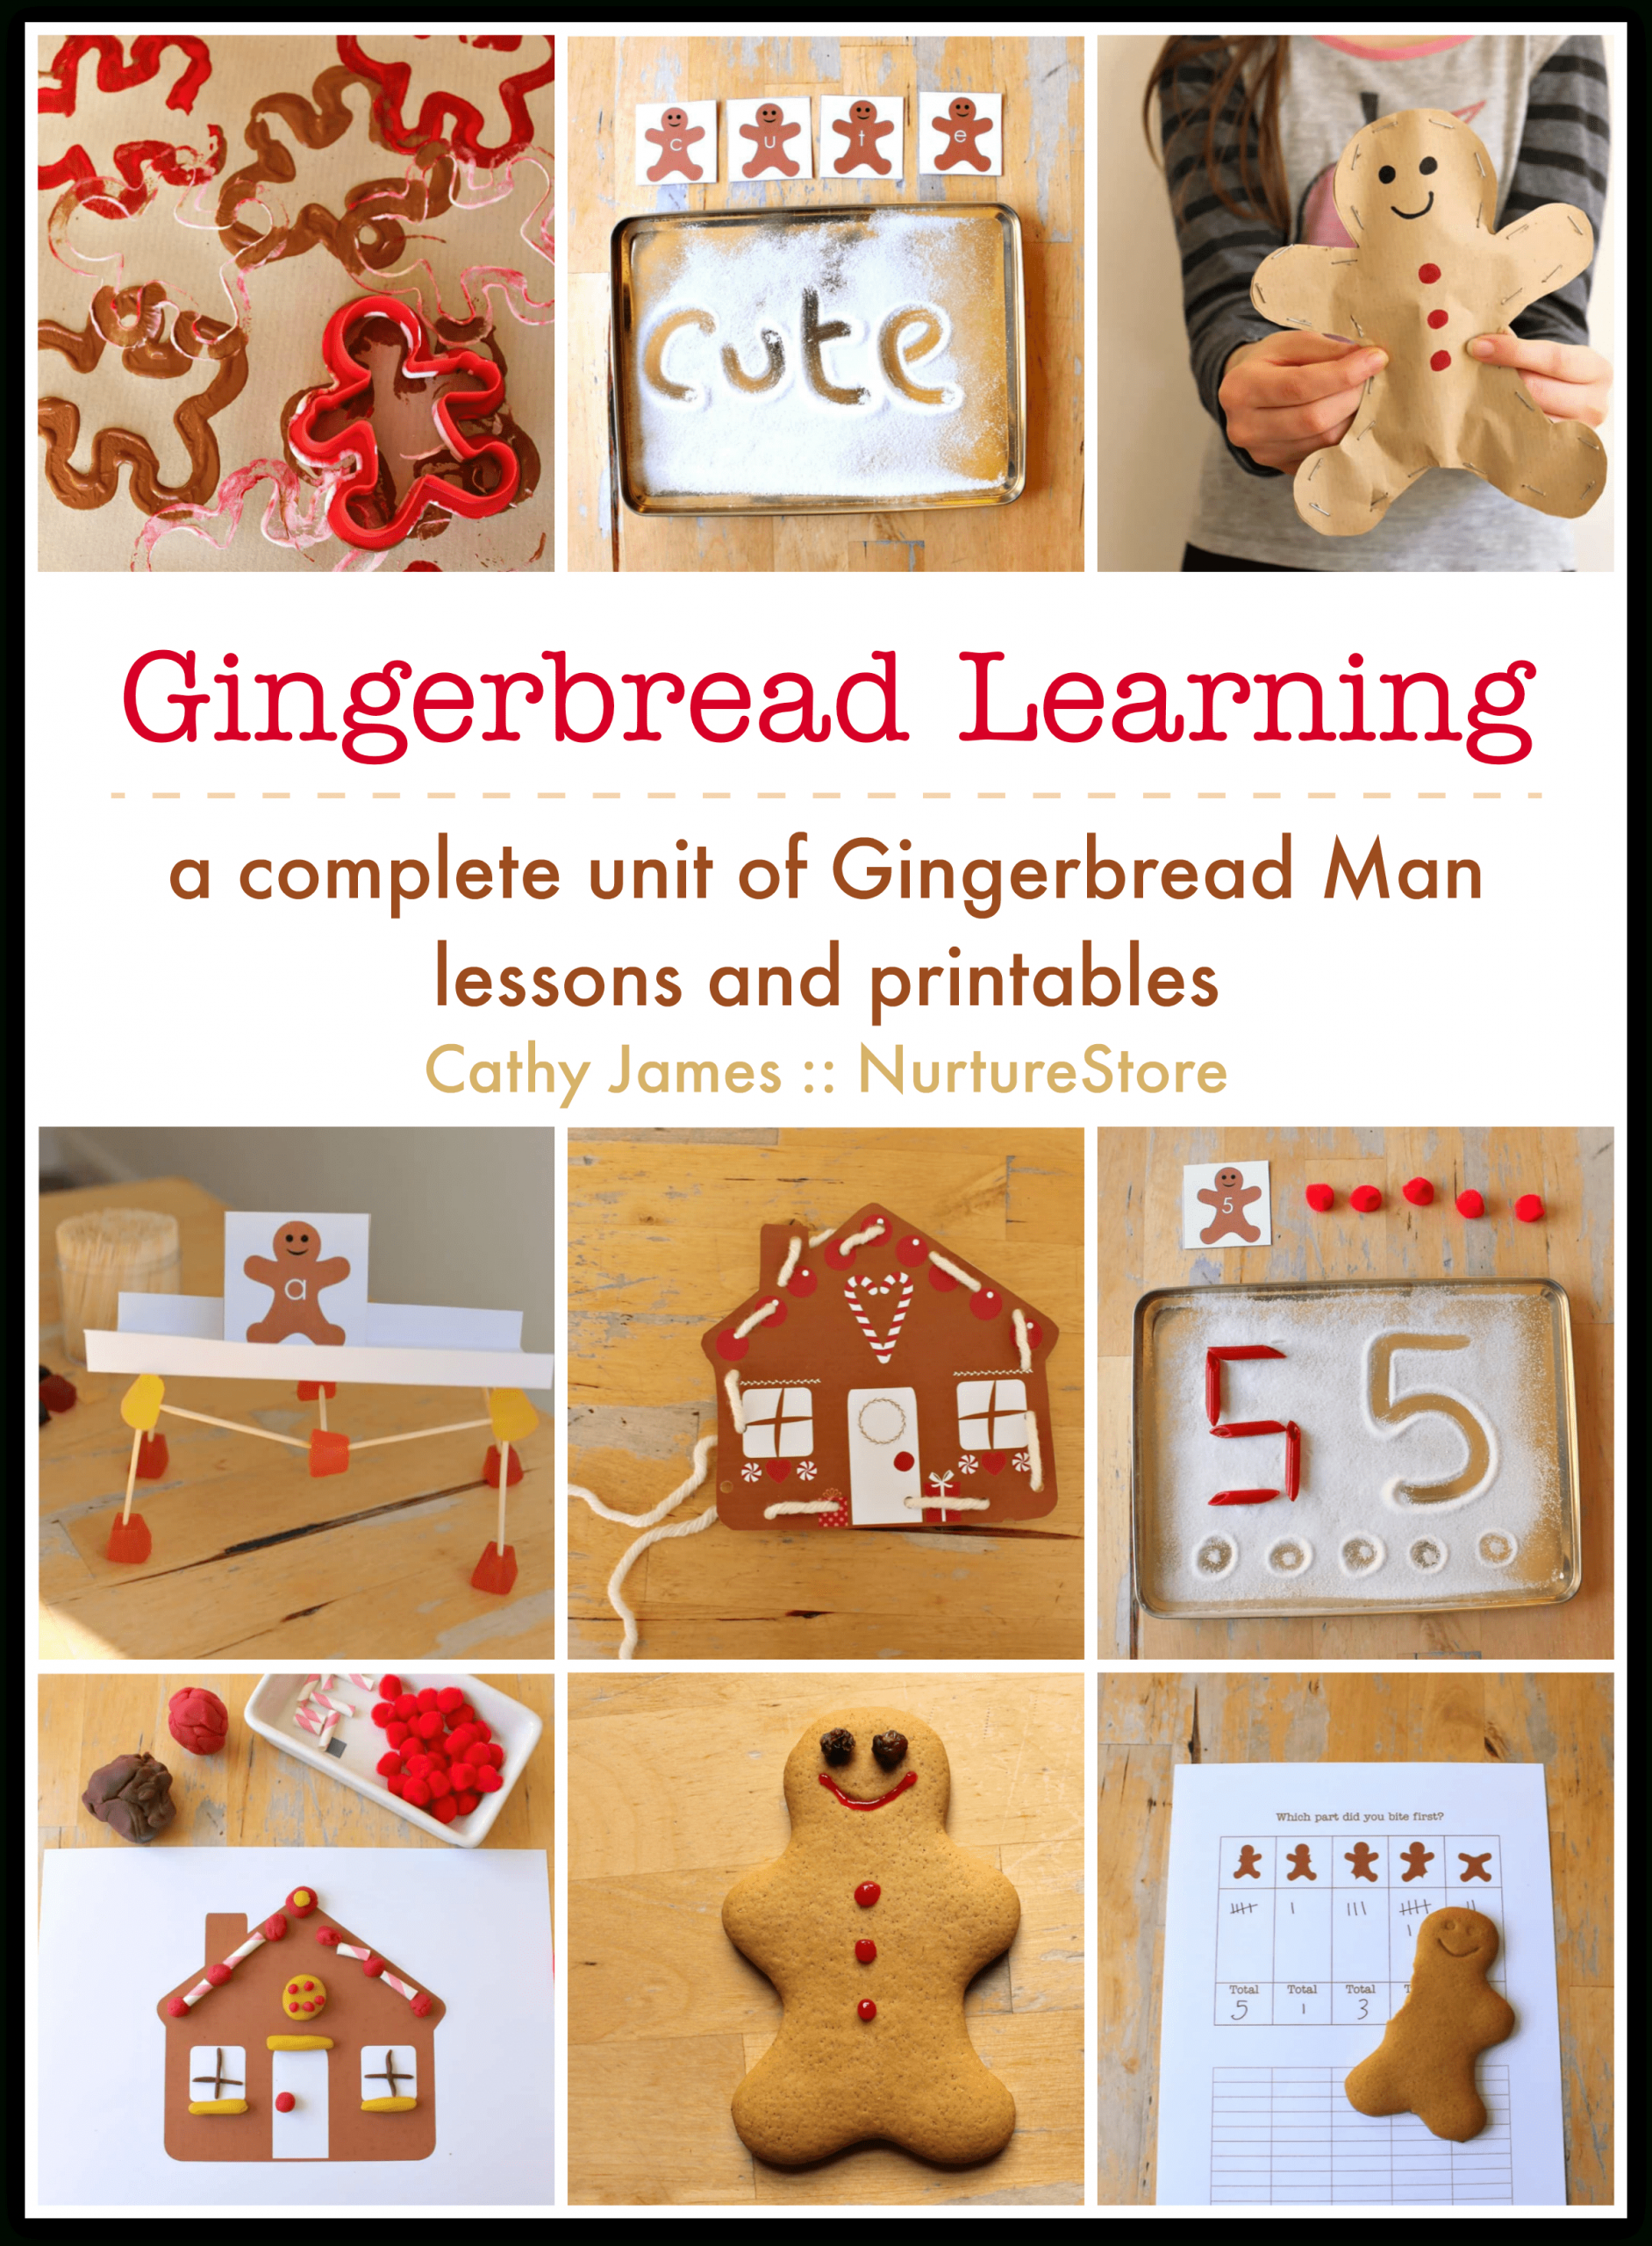 Gingerbread Man Activities And Printable Lesson Plans